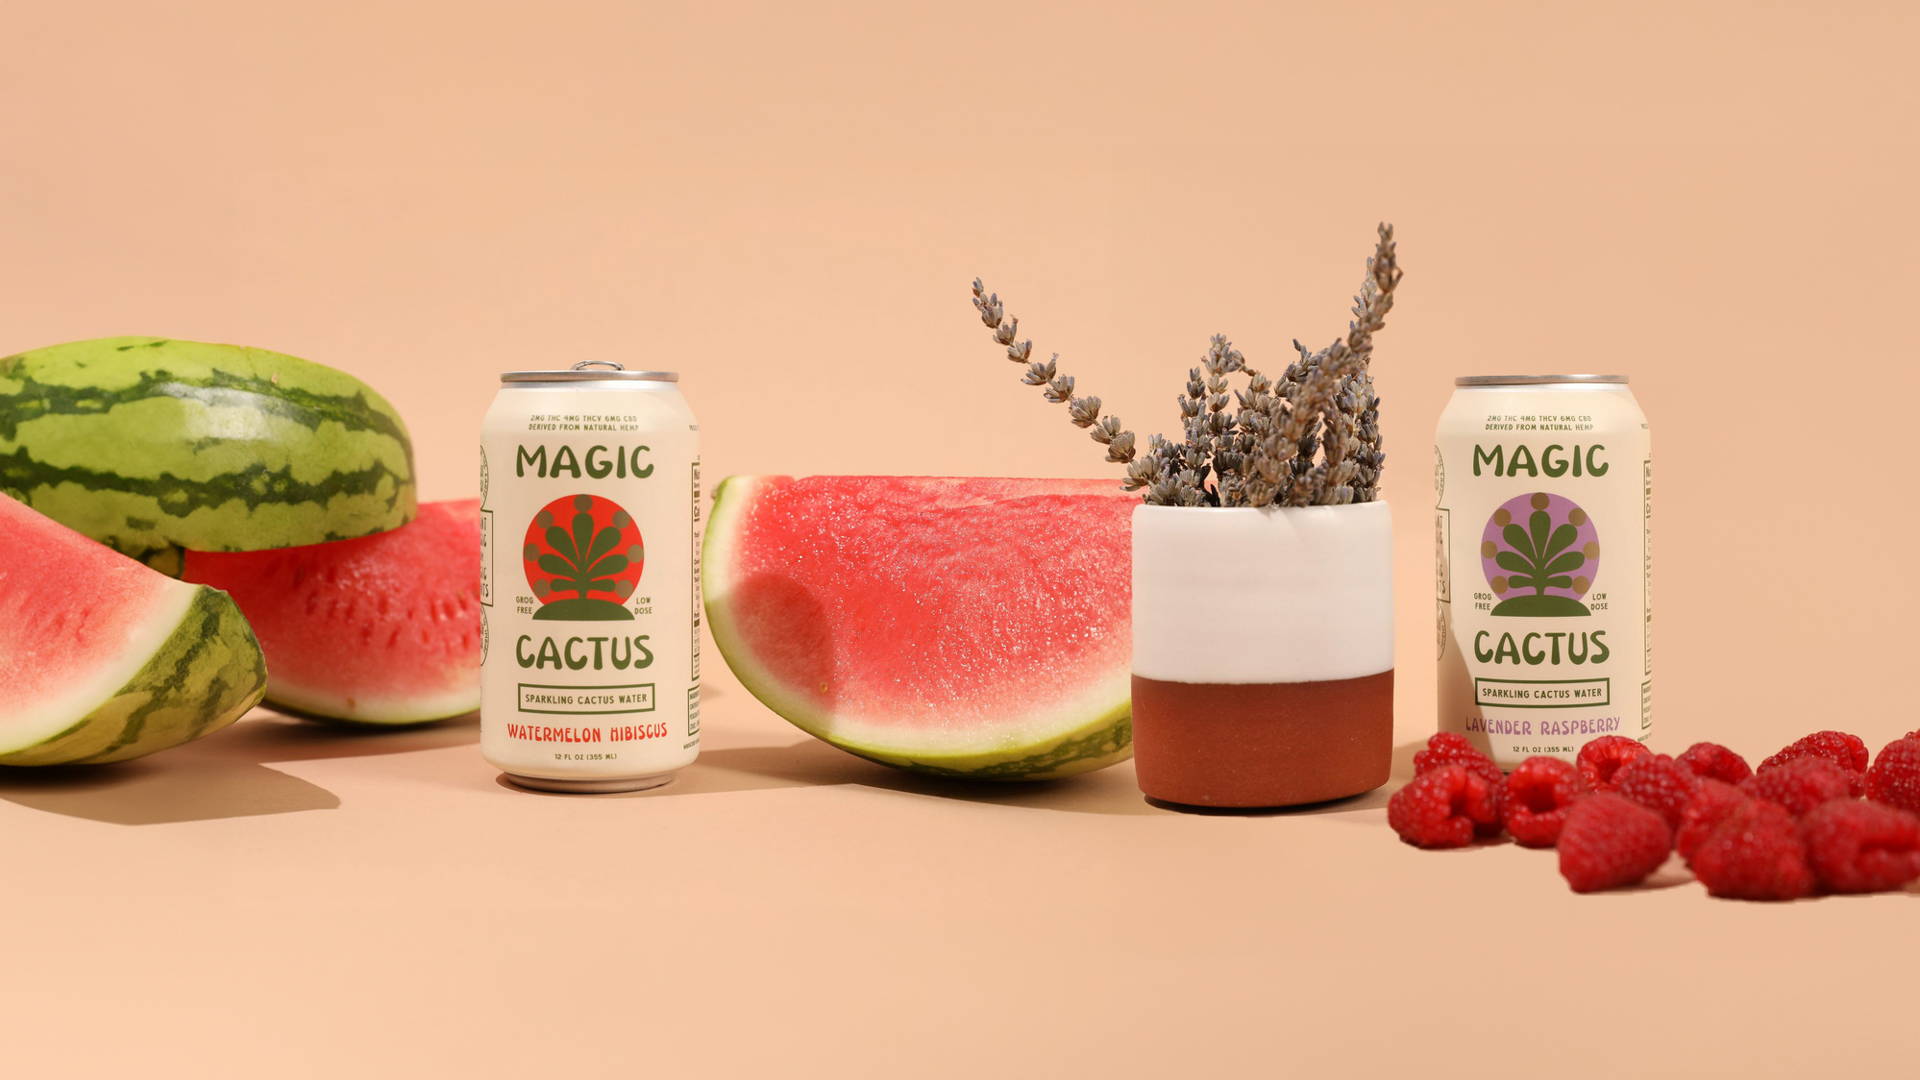 Featured image for Land-Designed Magic Cactus Combines Two Special Plants For a Session-Strength Infused Beverage